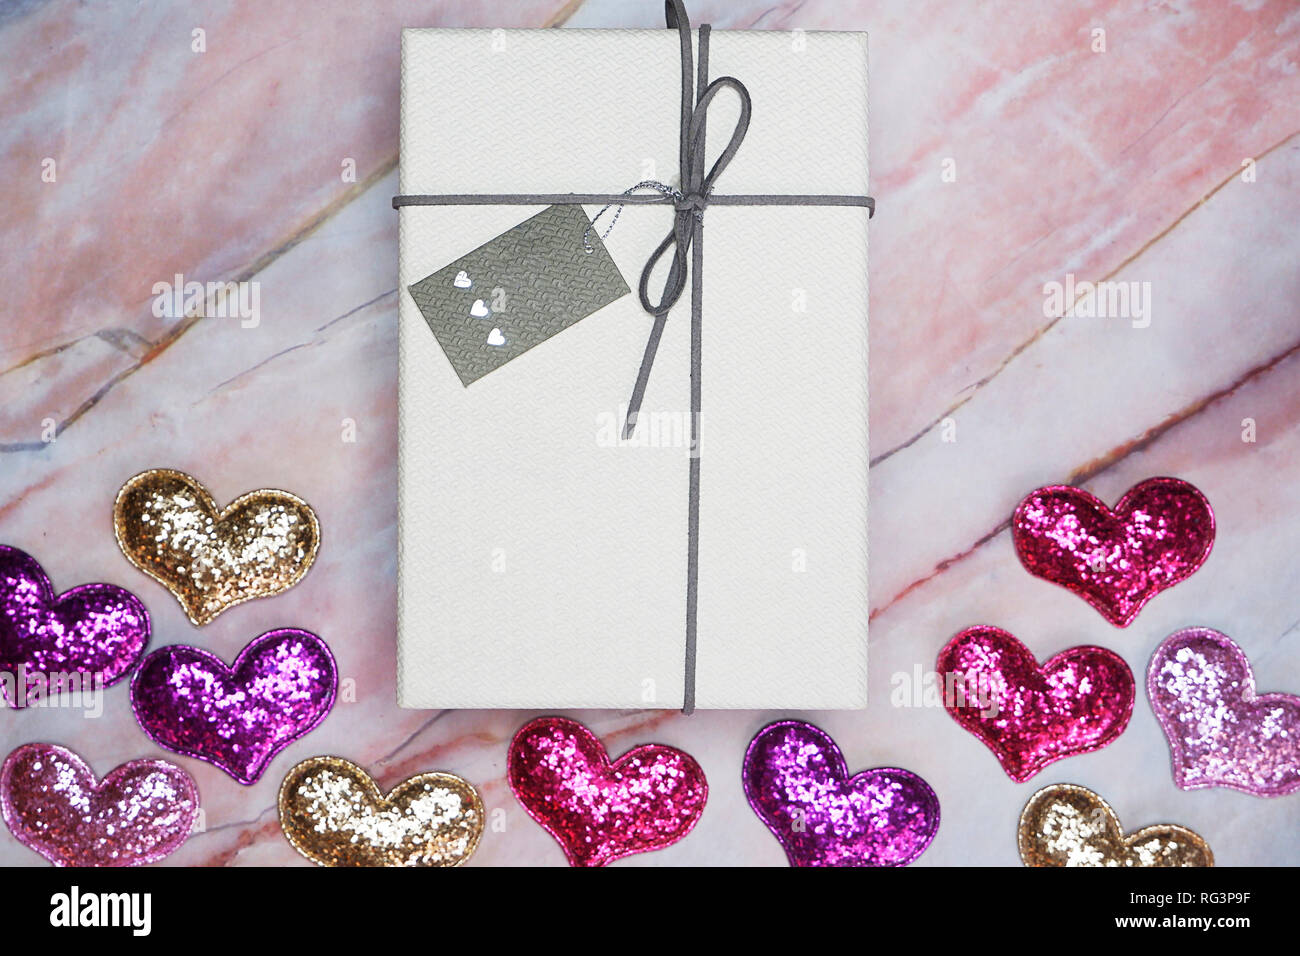 224,265 Valentines Wrapping Paper Images, Stock Photos, 3D objects